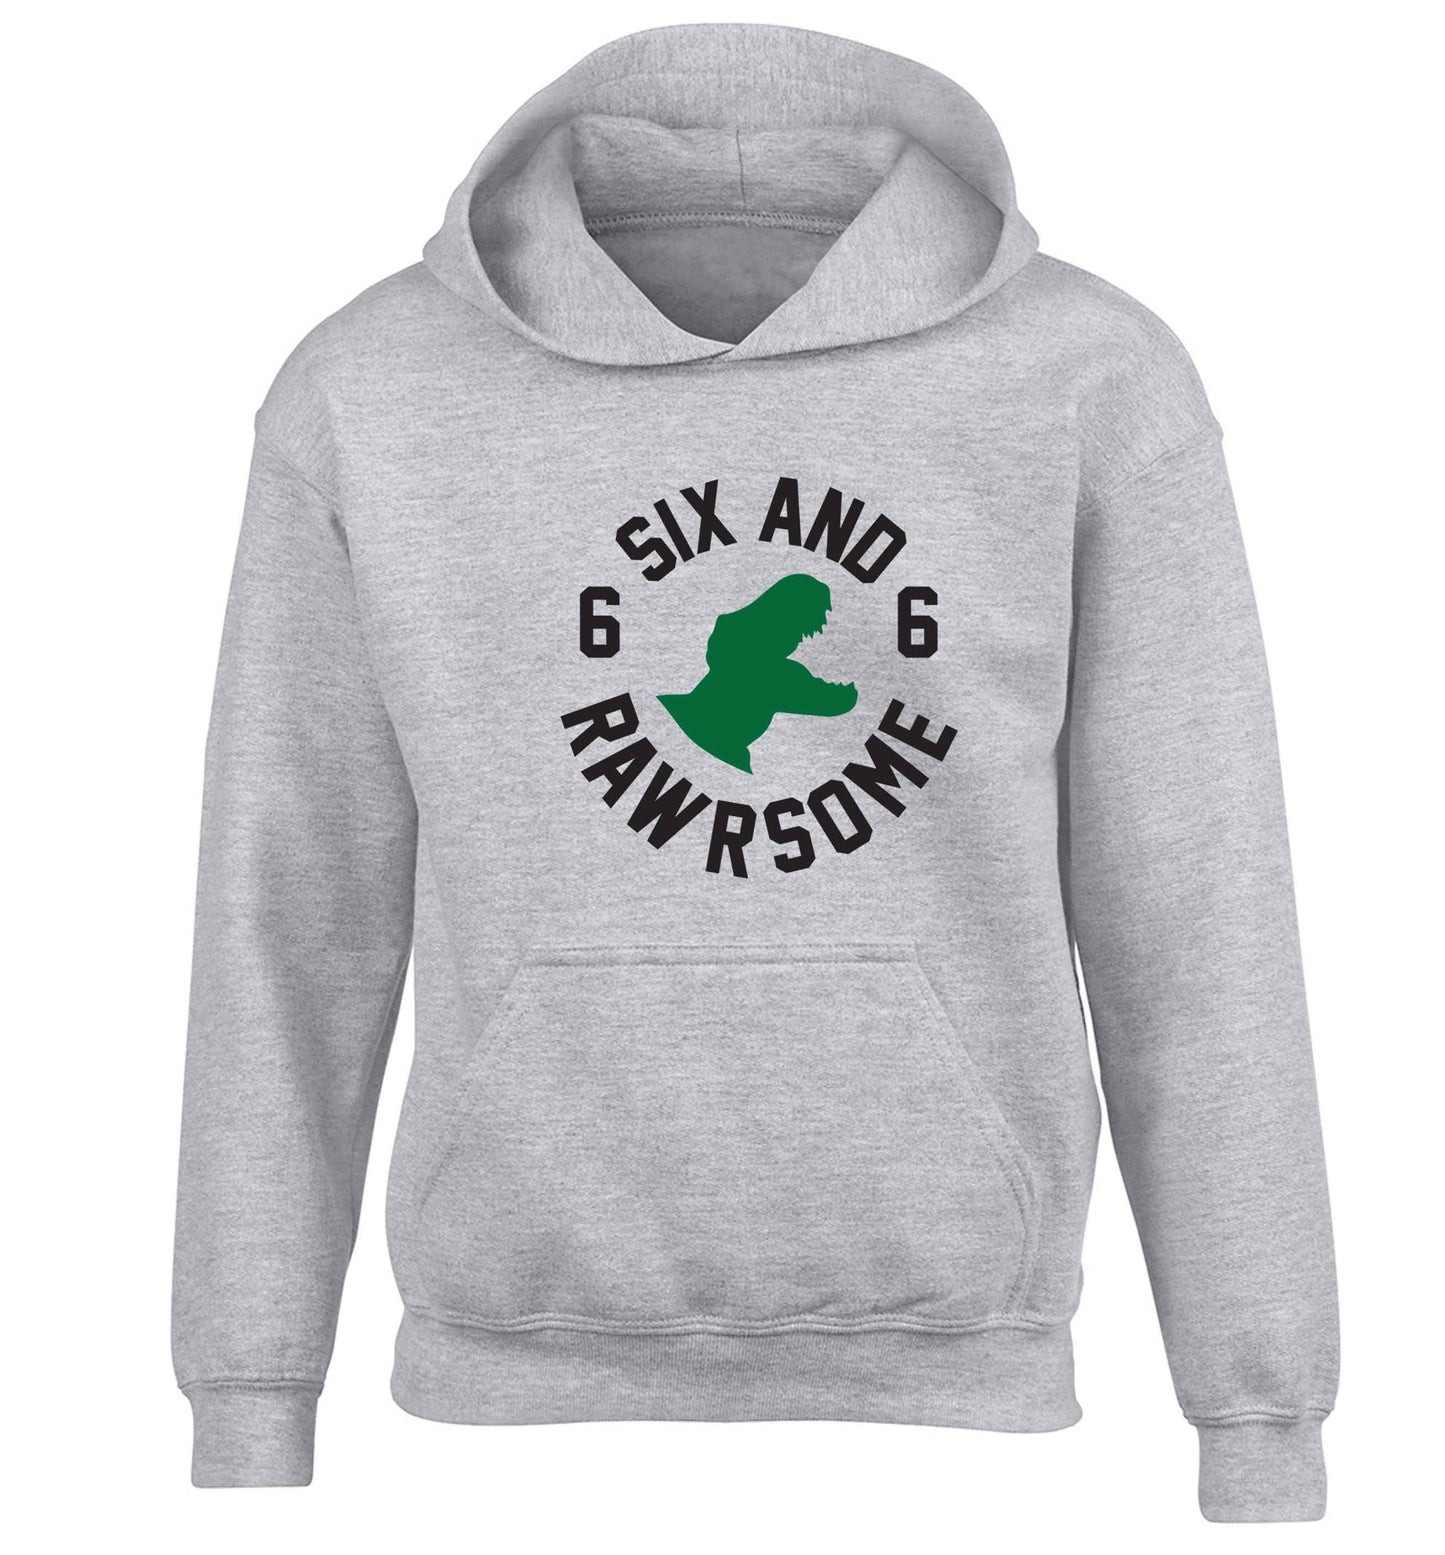 Six and rawrsome children's grey hoodie 12-13 Years